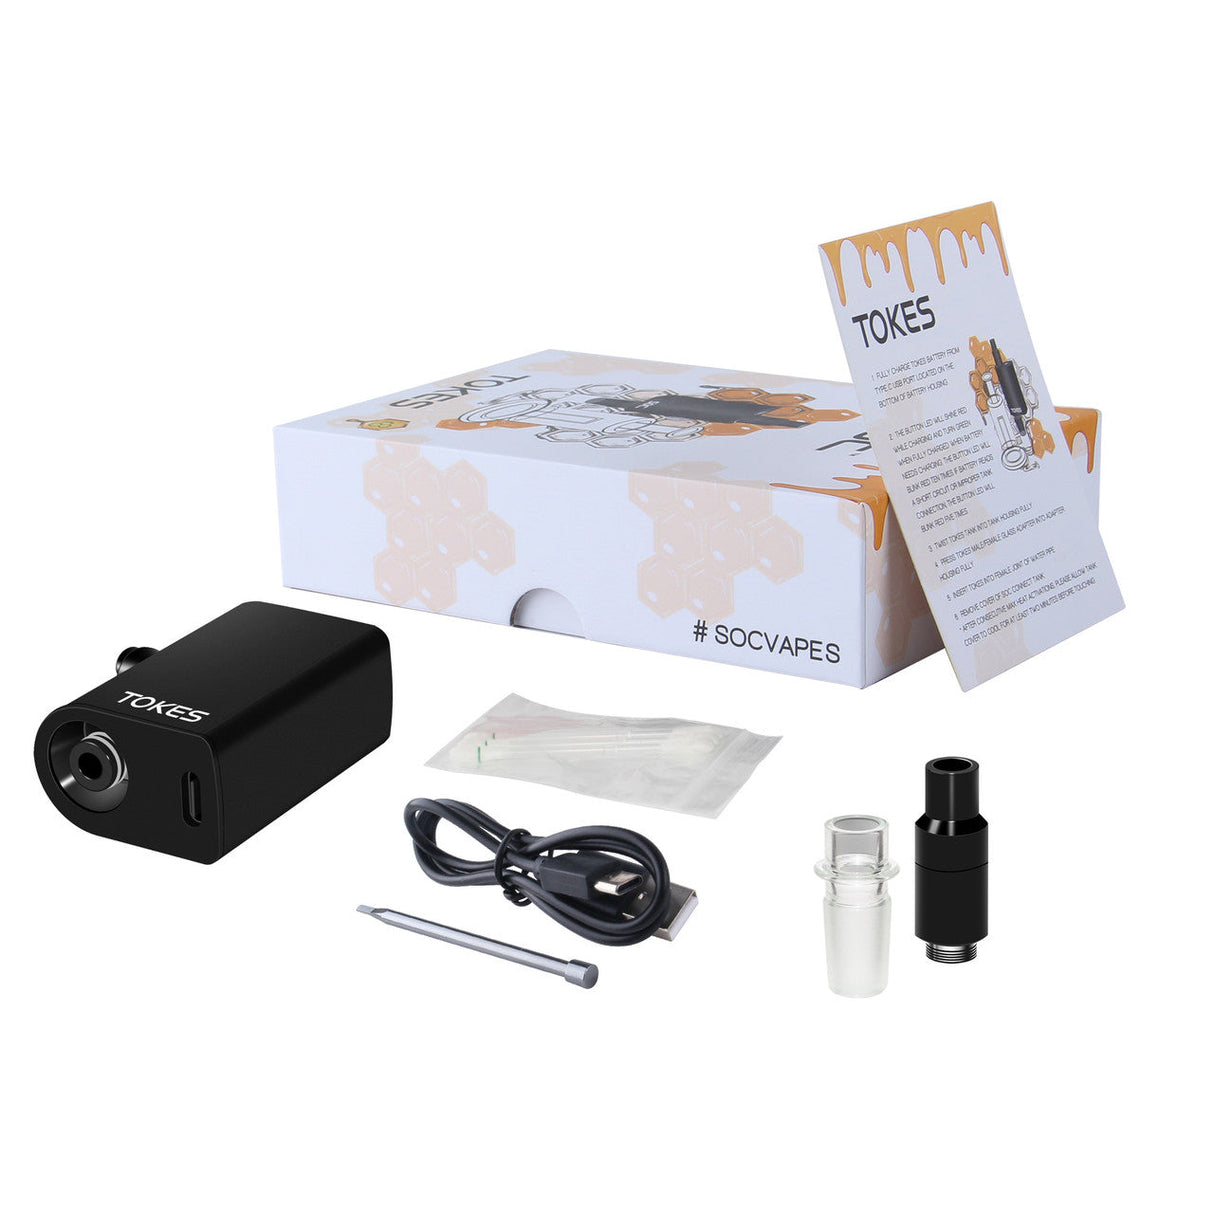 SOC Tokes Dual-Use Wax Vaporizer Kit in Black with 14mm Adapter, USB Cable, and Accessories